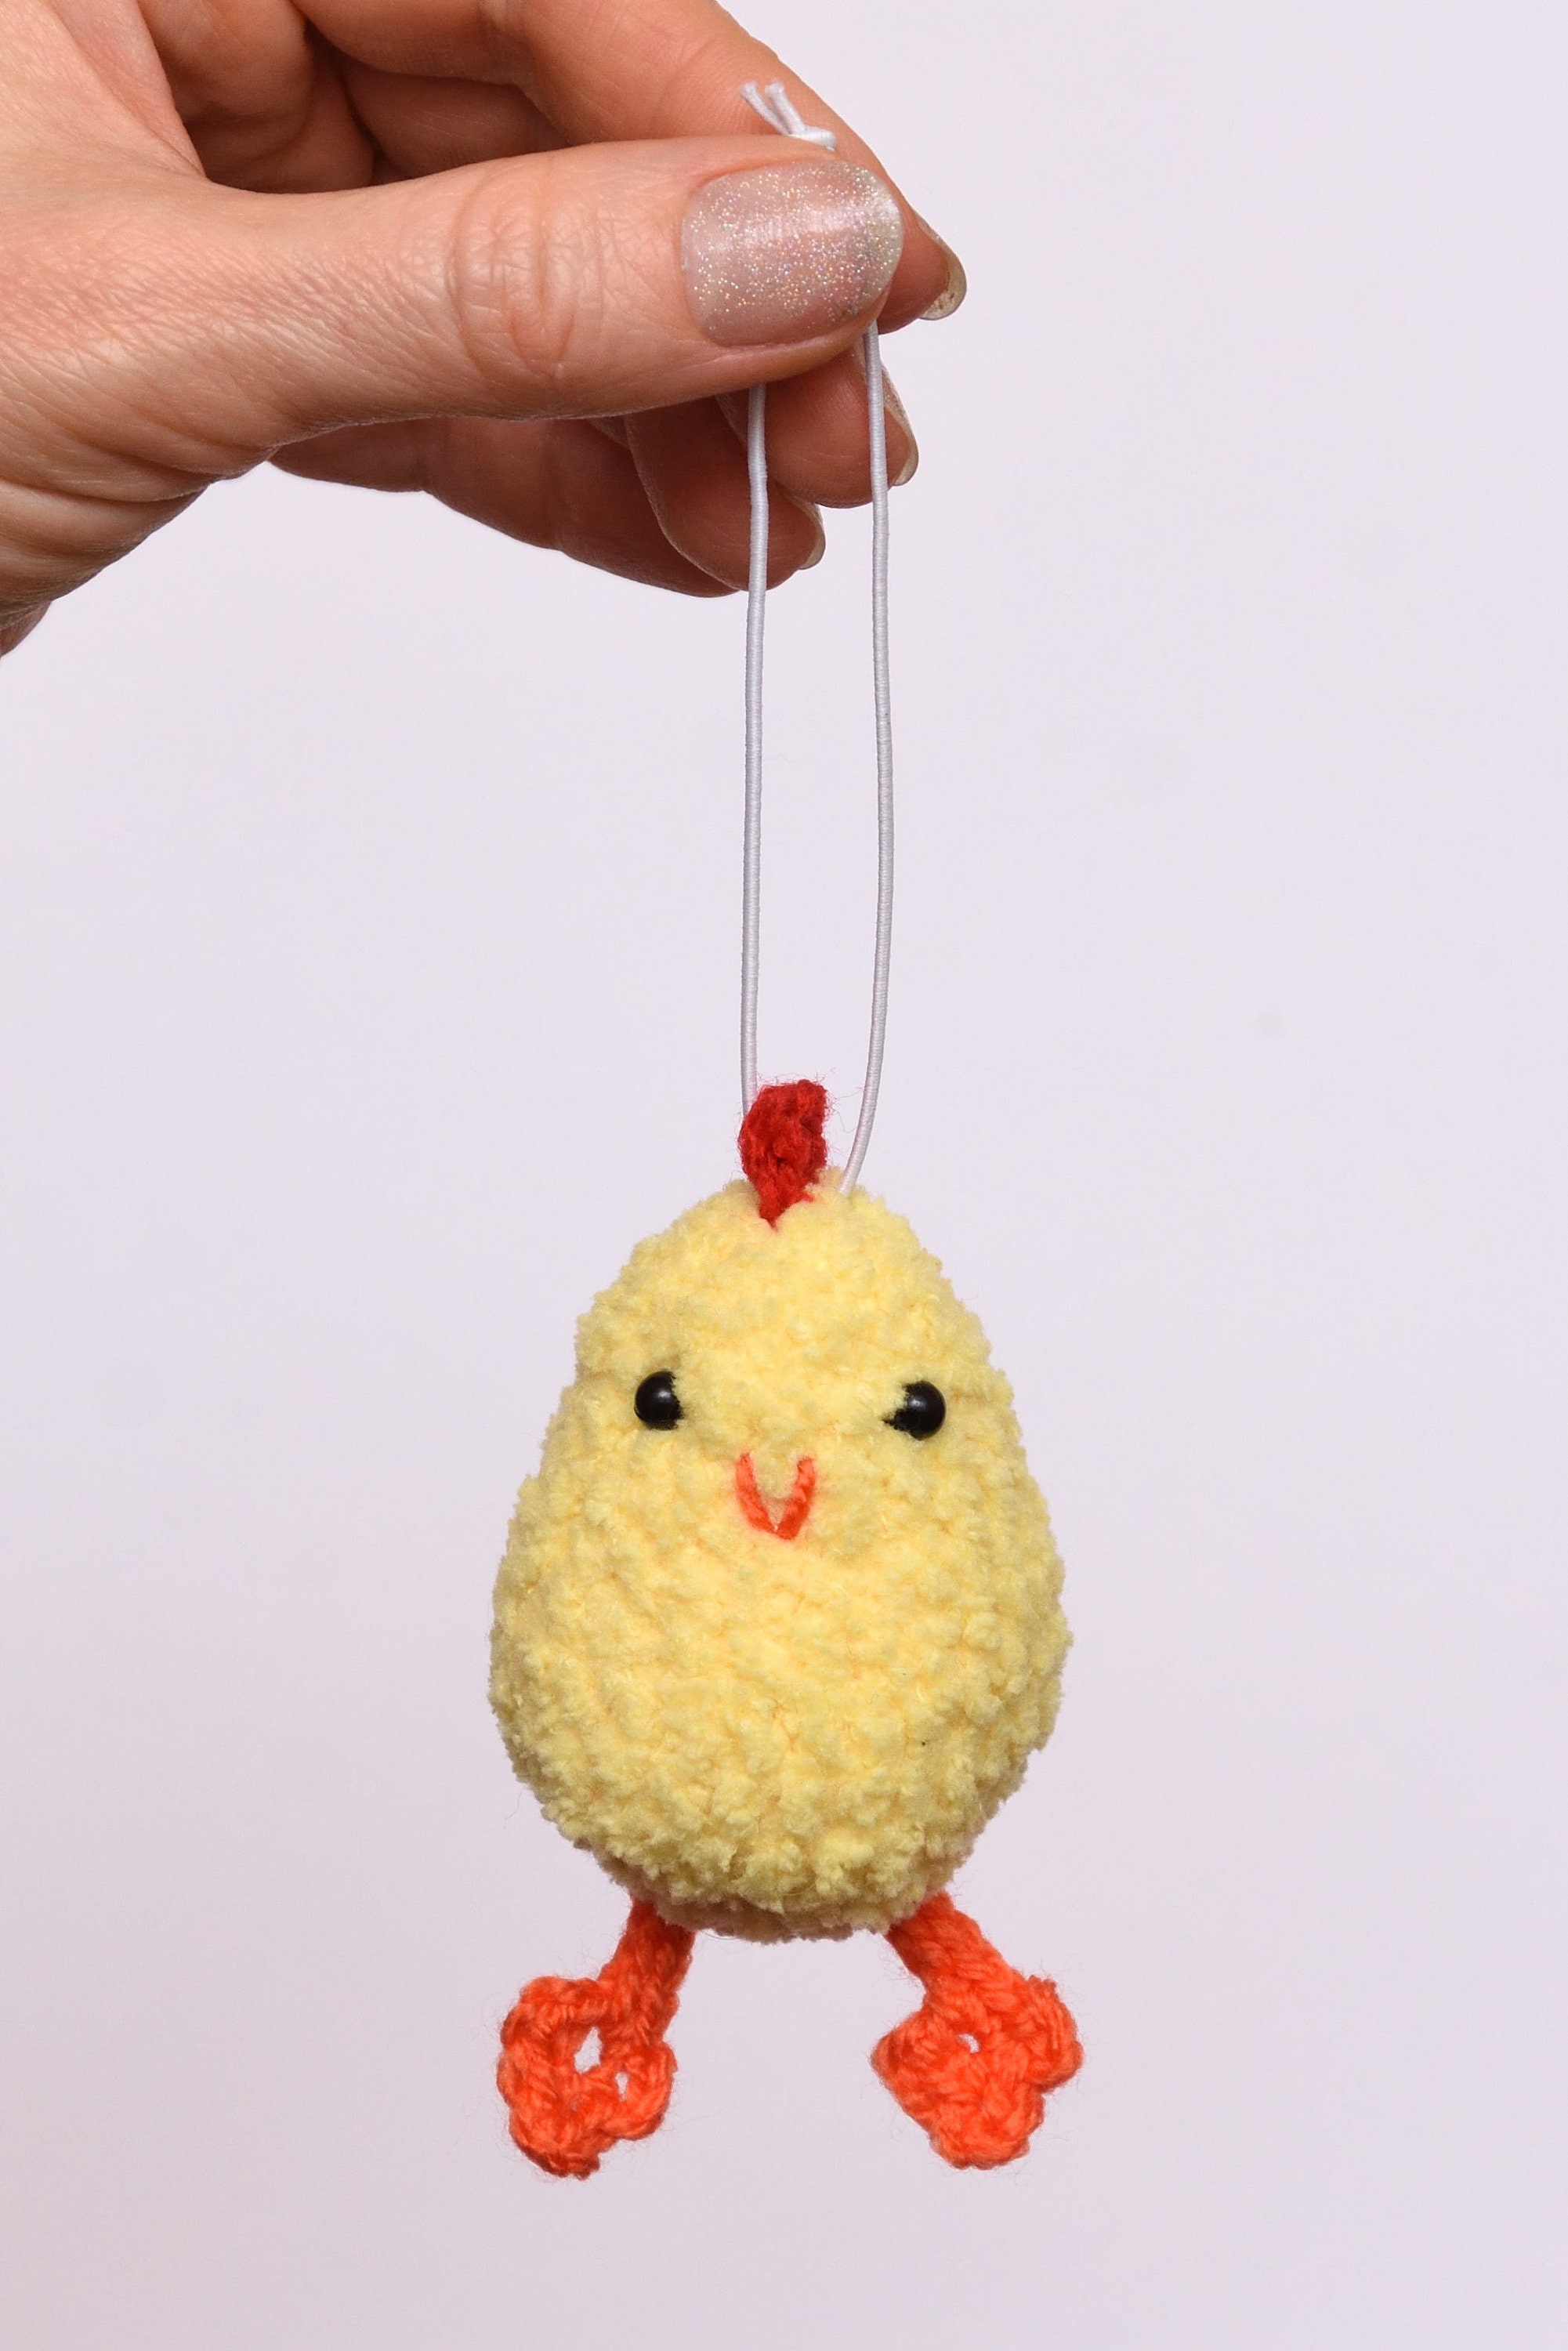 Crochet Chicken Charm Easter Hen Toy Car Rear View Mirror Amigurumi Car  Hanging Charm Rearview Car Charm Chicken Plushie New Driver Gift 